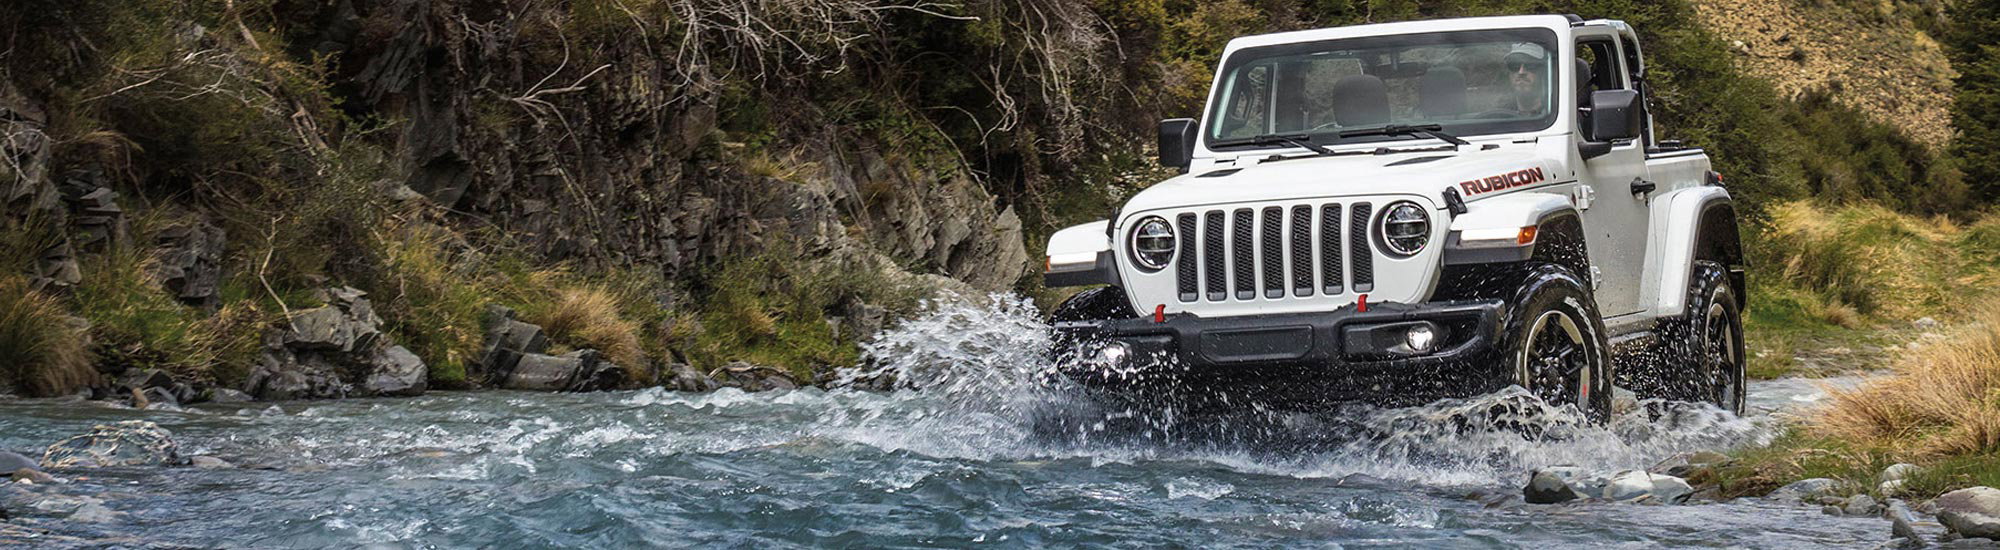 Jeep Wrangler 2DR - Andrew Simms Jeep